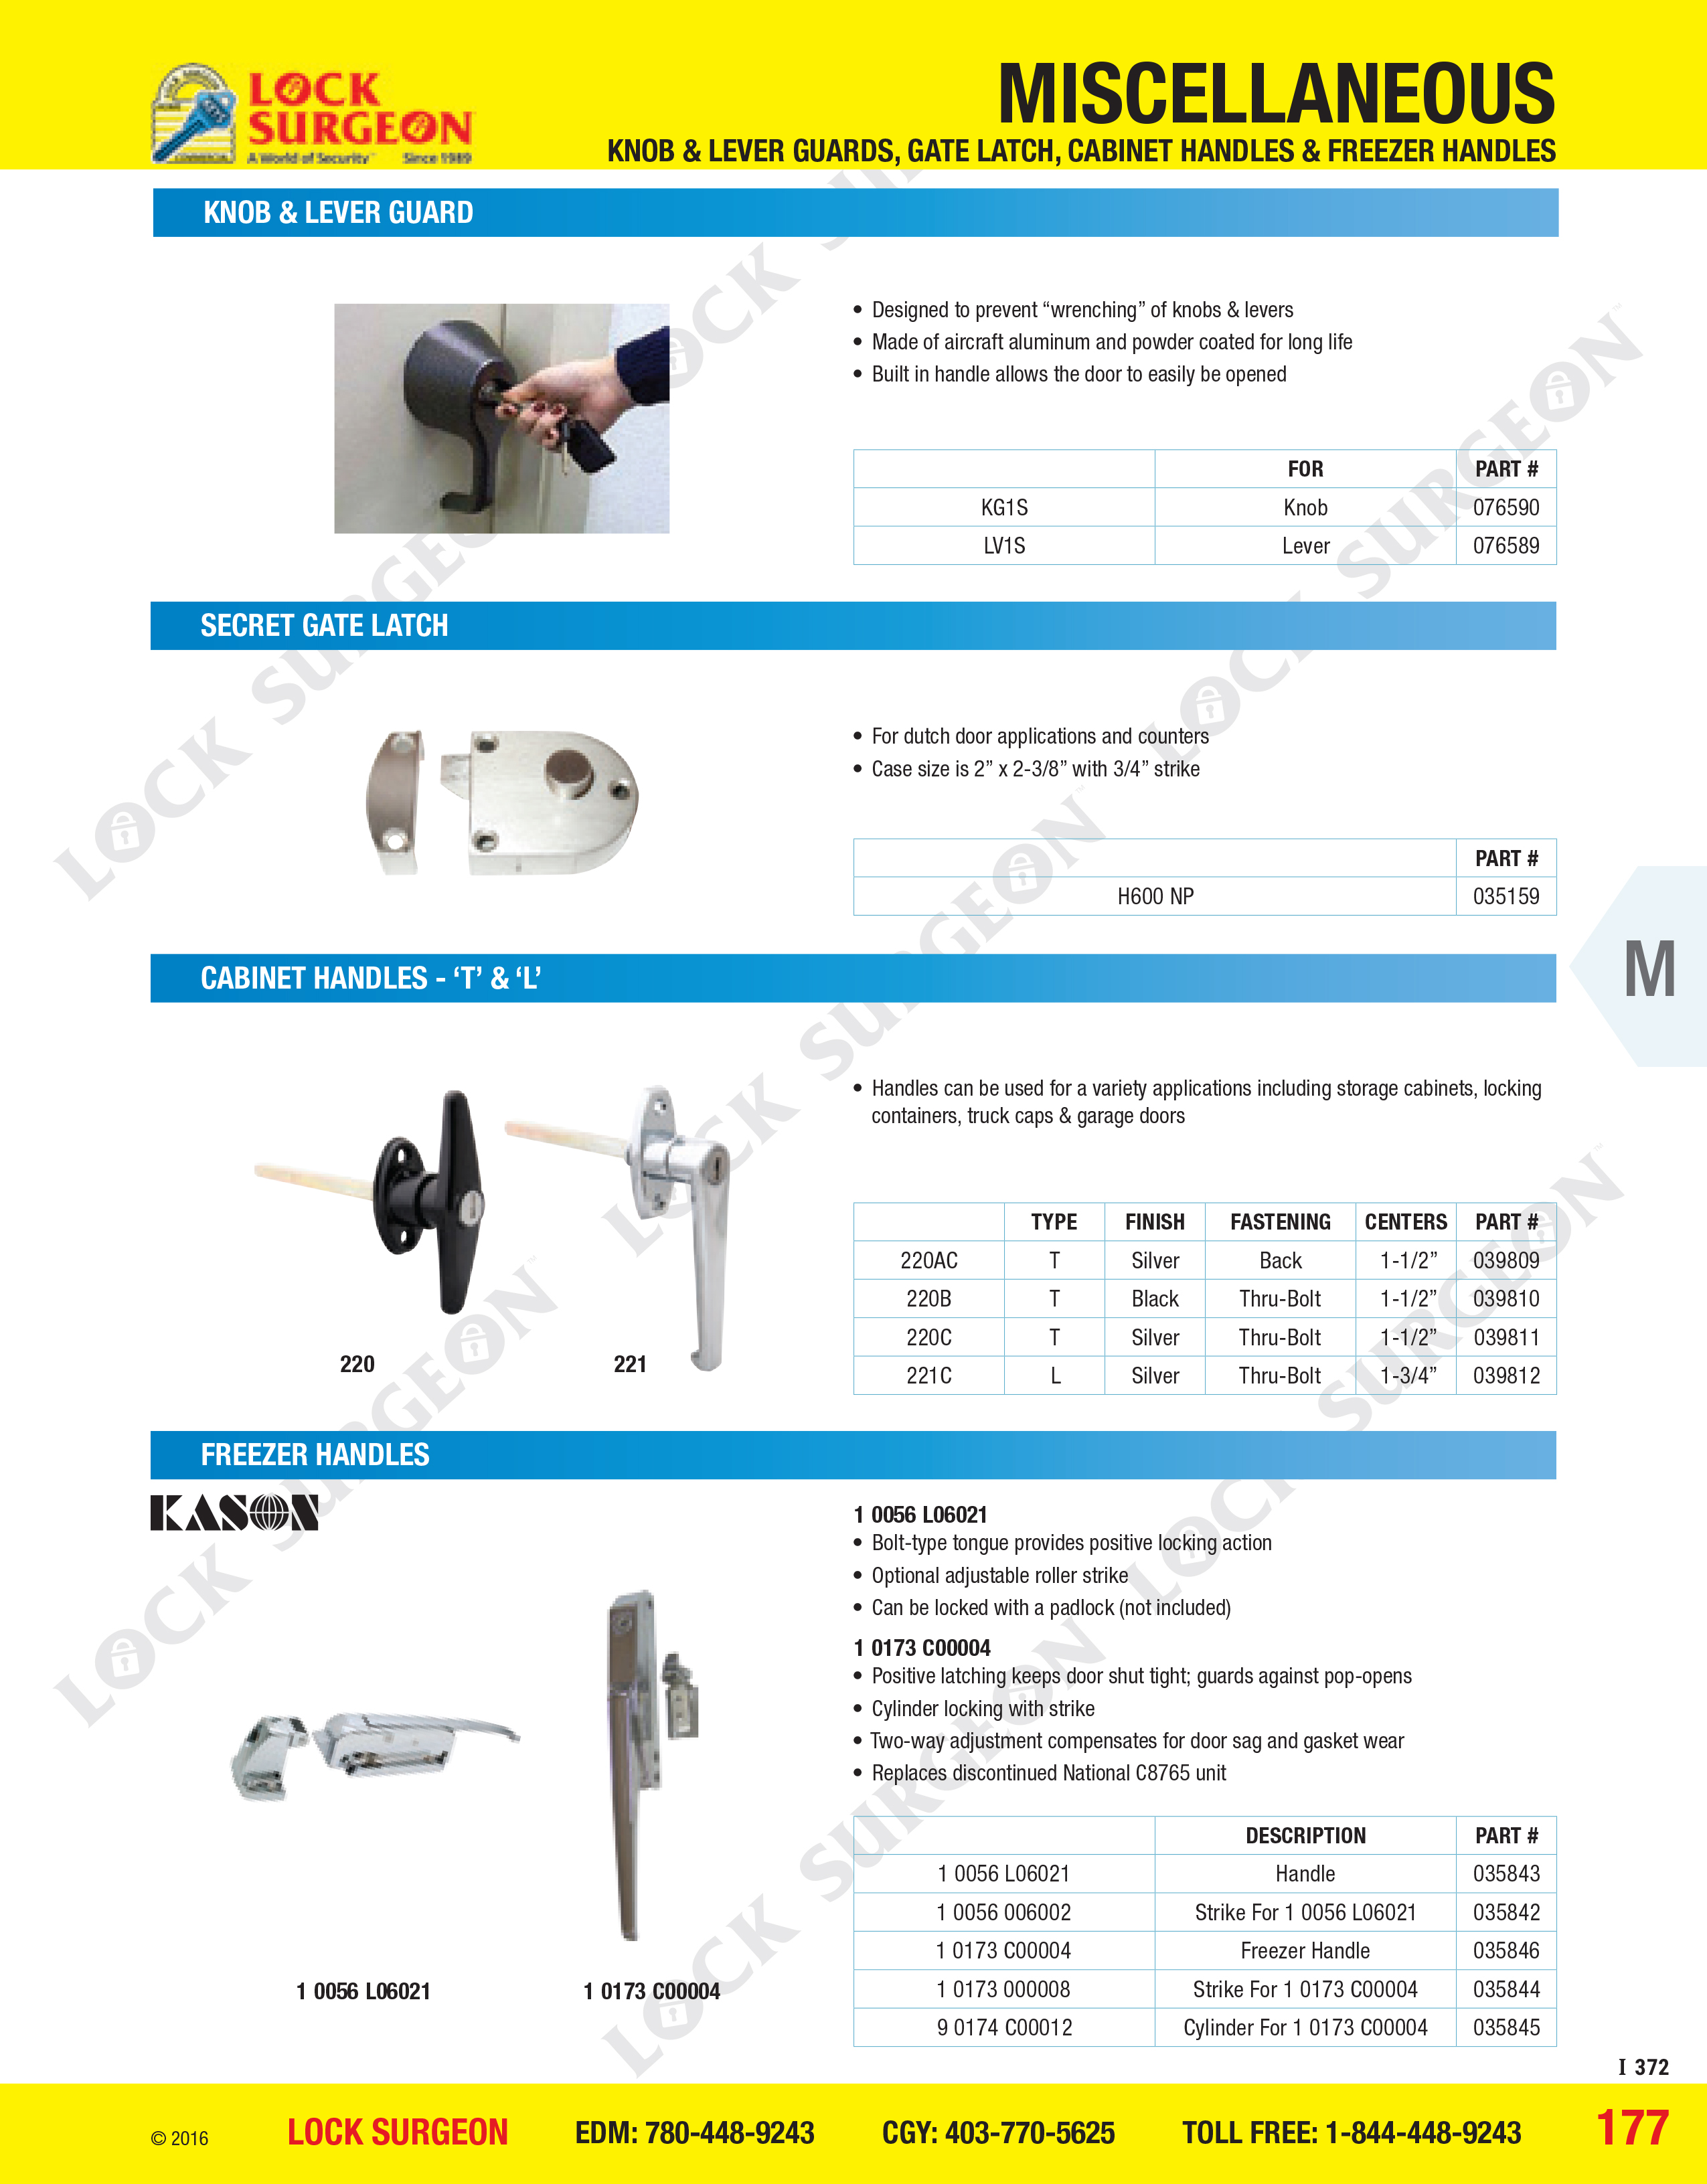 Knob and lever guard, secret gate latches, cabinet handles T and L, freezer handles